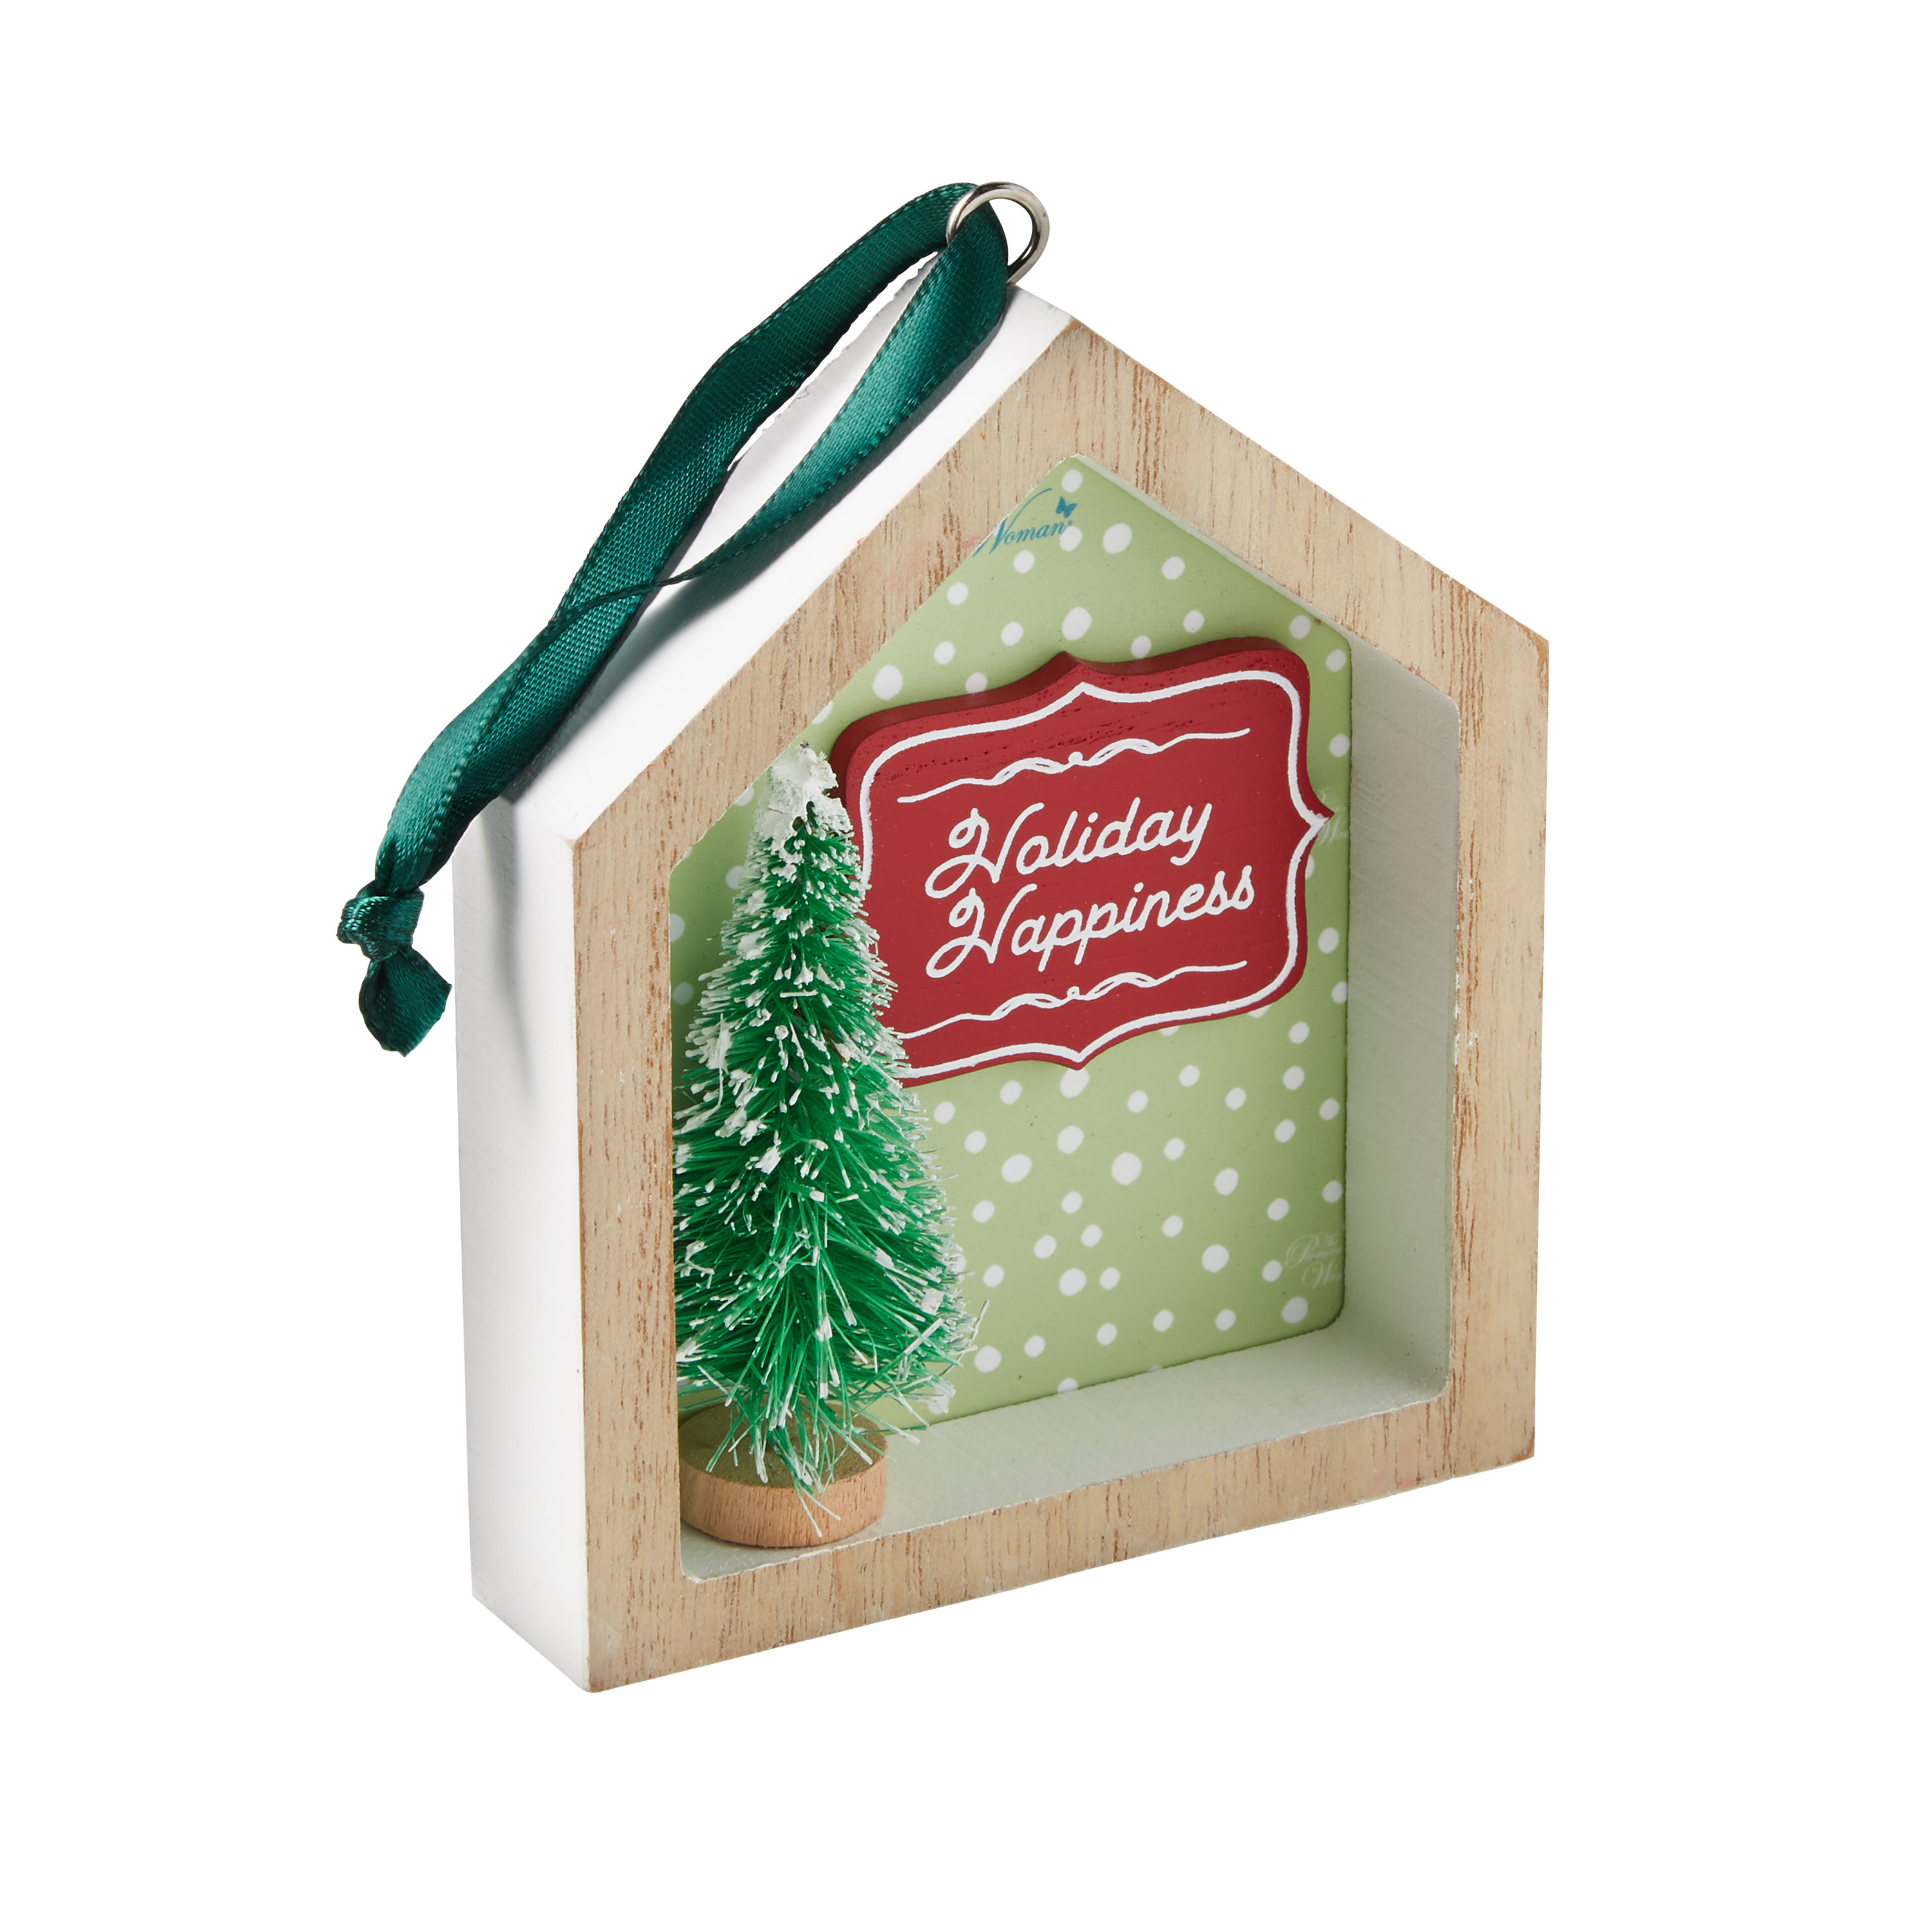 The Pioneer Woman House Shadowbox 3-Piece Ornament Bundle - image 5 of 5